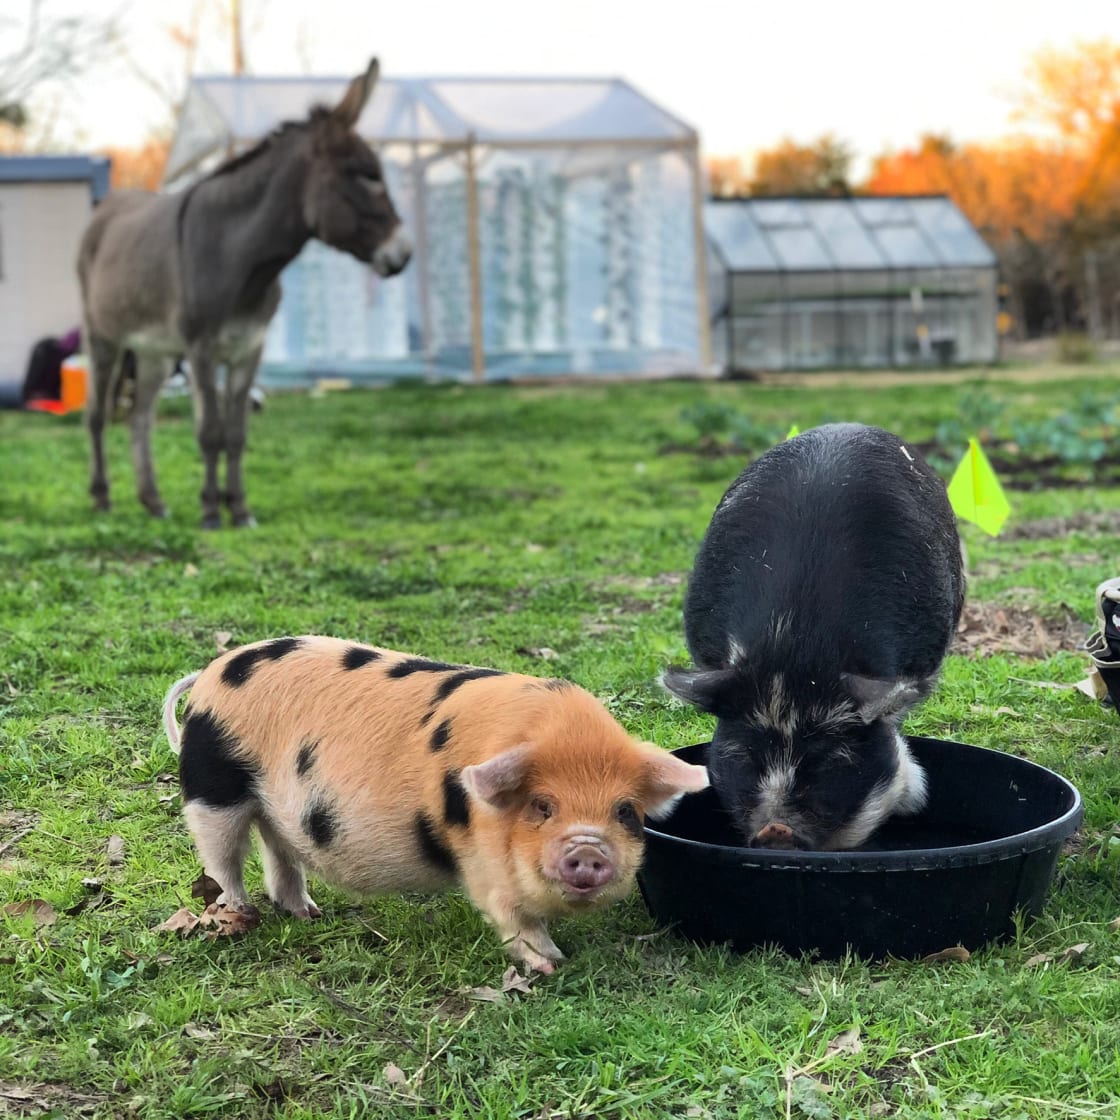 Kunekune pigs Bertha and Rupert and guard donkey Ruth would love to meet you on the farm tour!